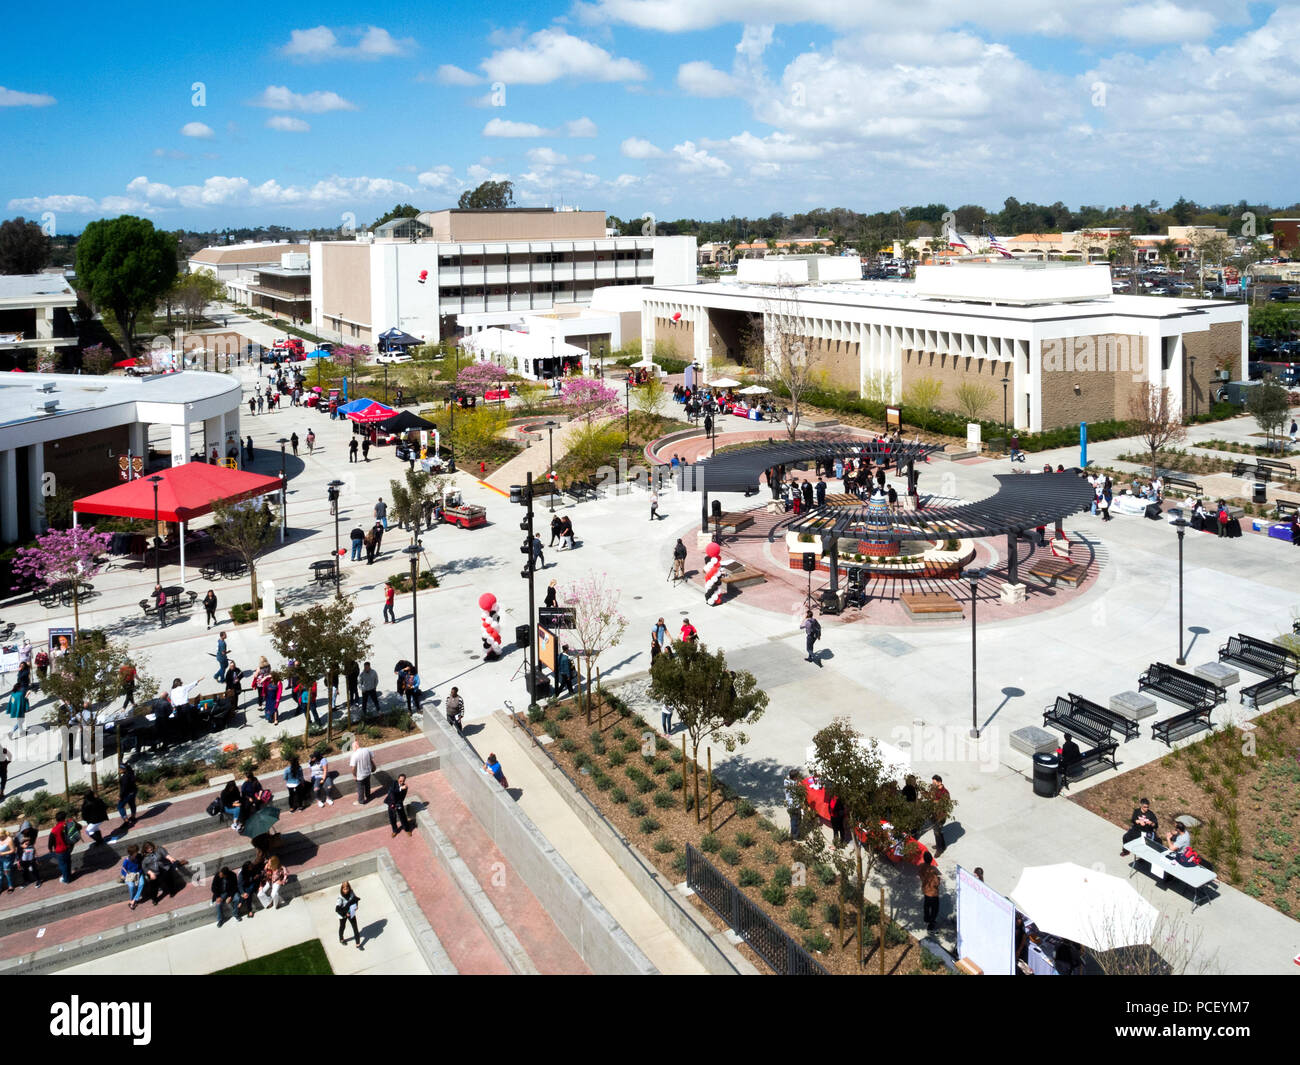 Students Fill The Campus Of A Santa Ana Ca Community College At Lunchtime Stock Photo Alamy